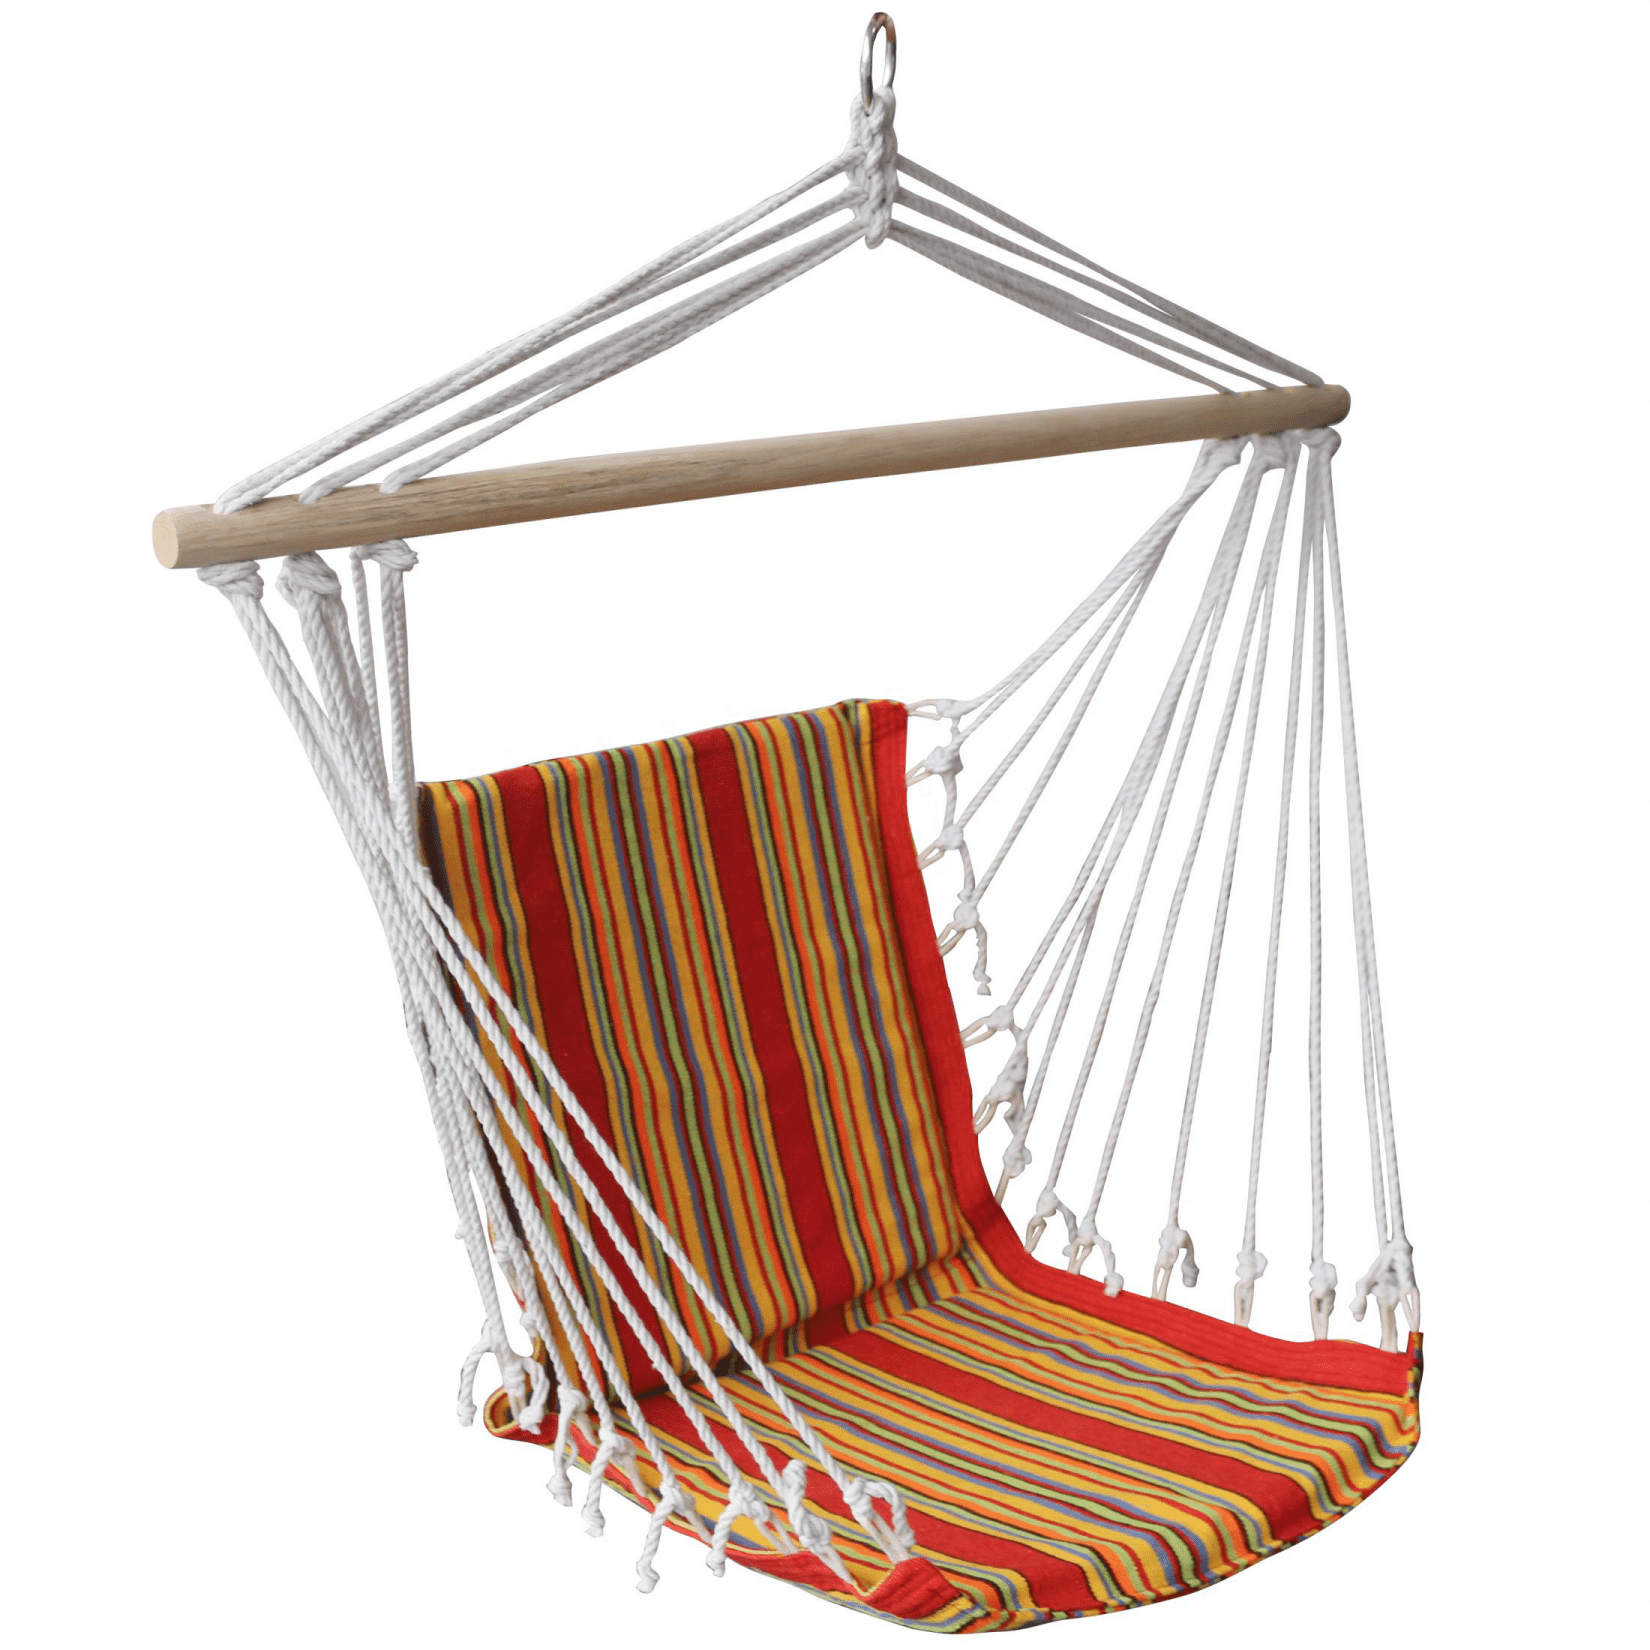 Chinese wholesale Wicker Hanging Chair - Pol.ycotton hammock chair with woodbar – Top Asian